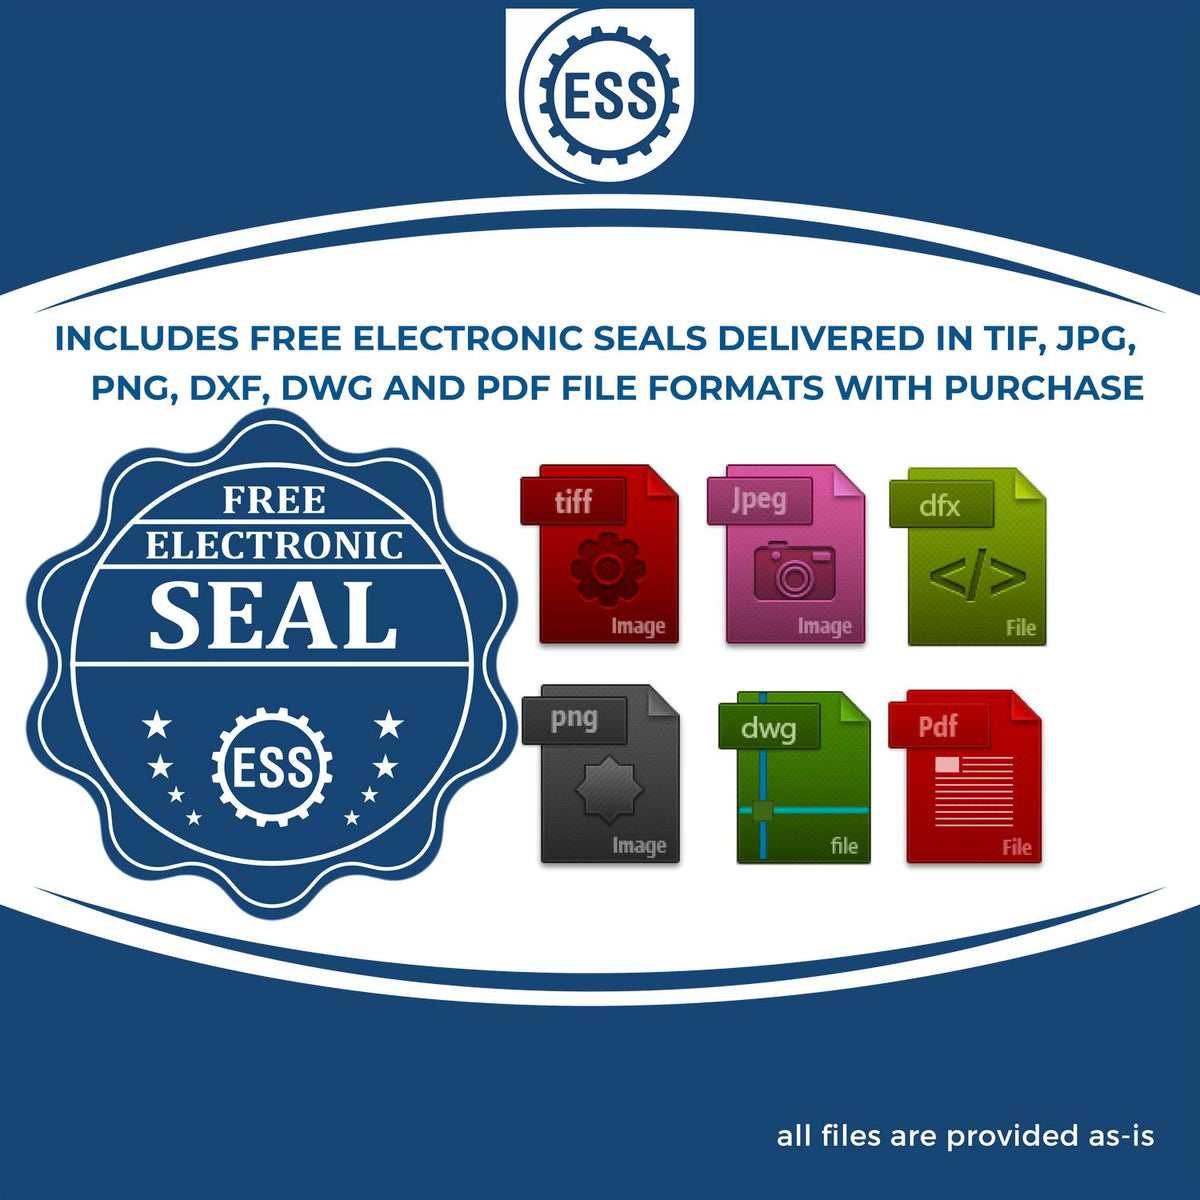 An infographic for the free electronic seal for the Florida Professional Engineer Seal Stamp illustrating the different file type icons such as DXF, DWG, TIF, JPG and PNG.